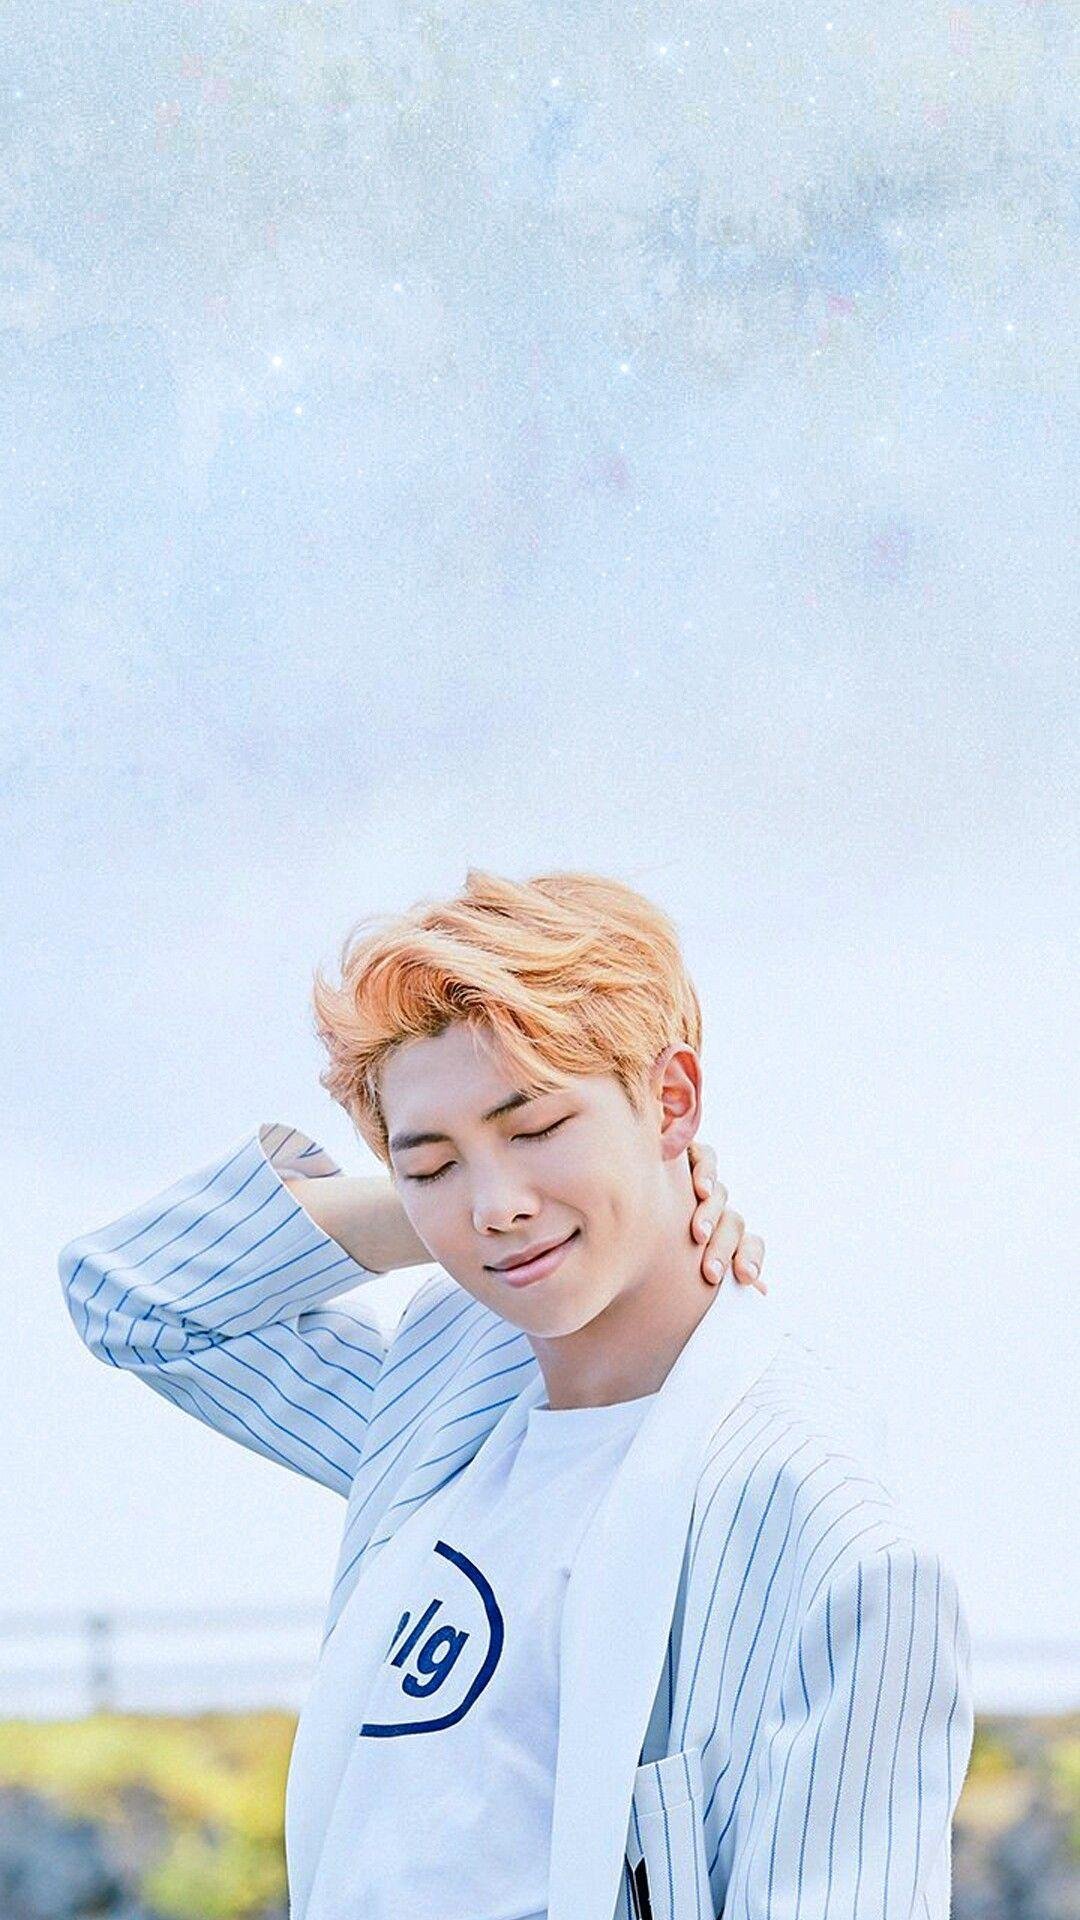 Bts rm aesthetic wallpapers Wallpapers Download | MobCup